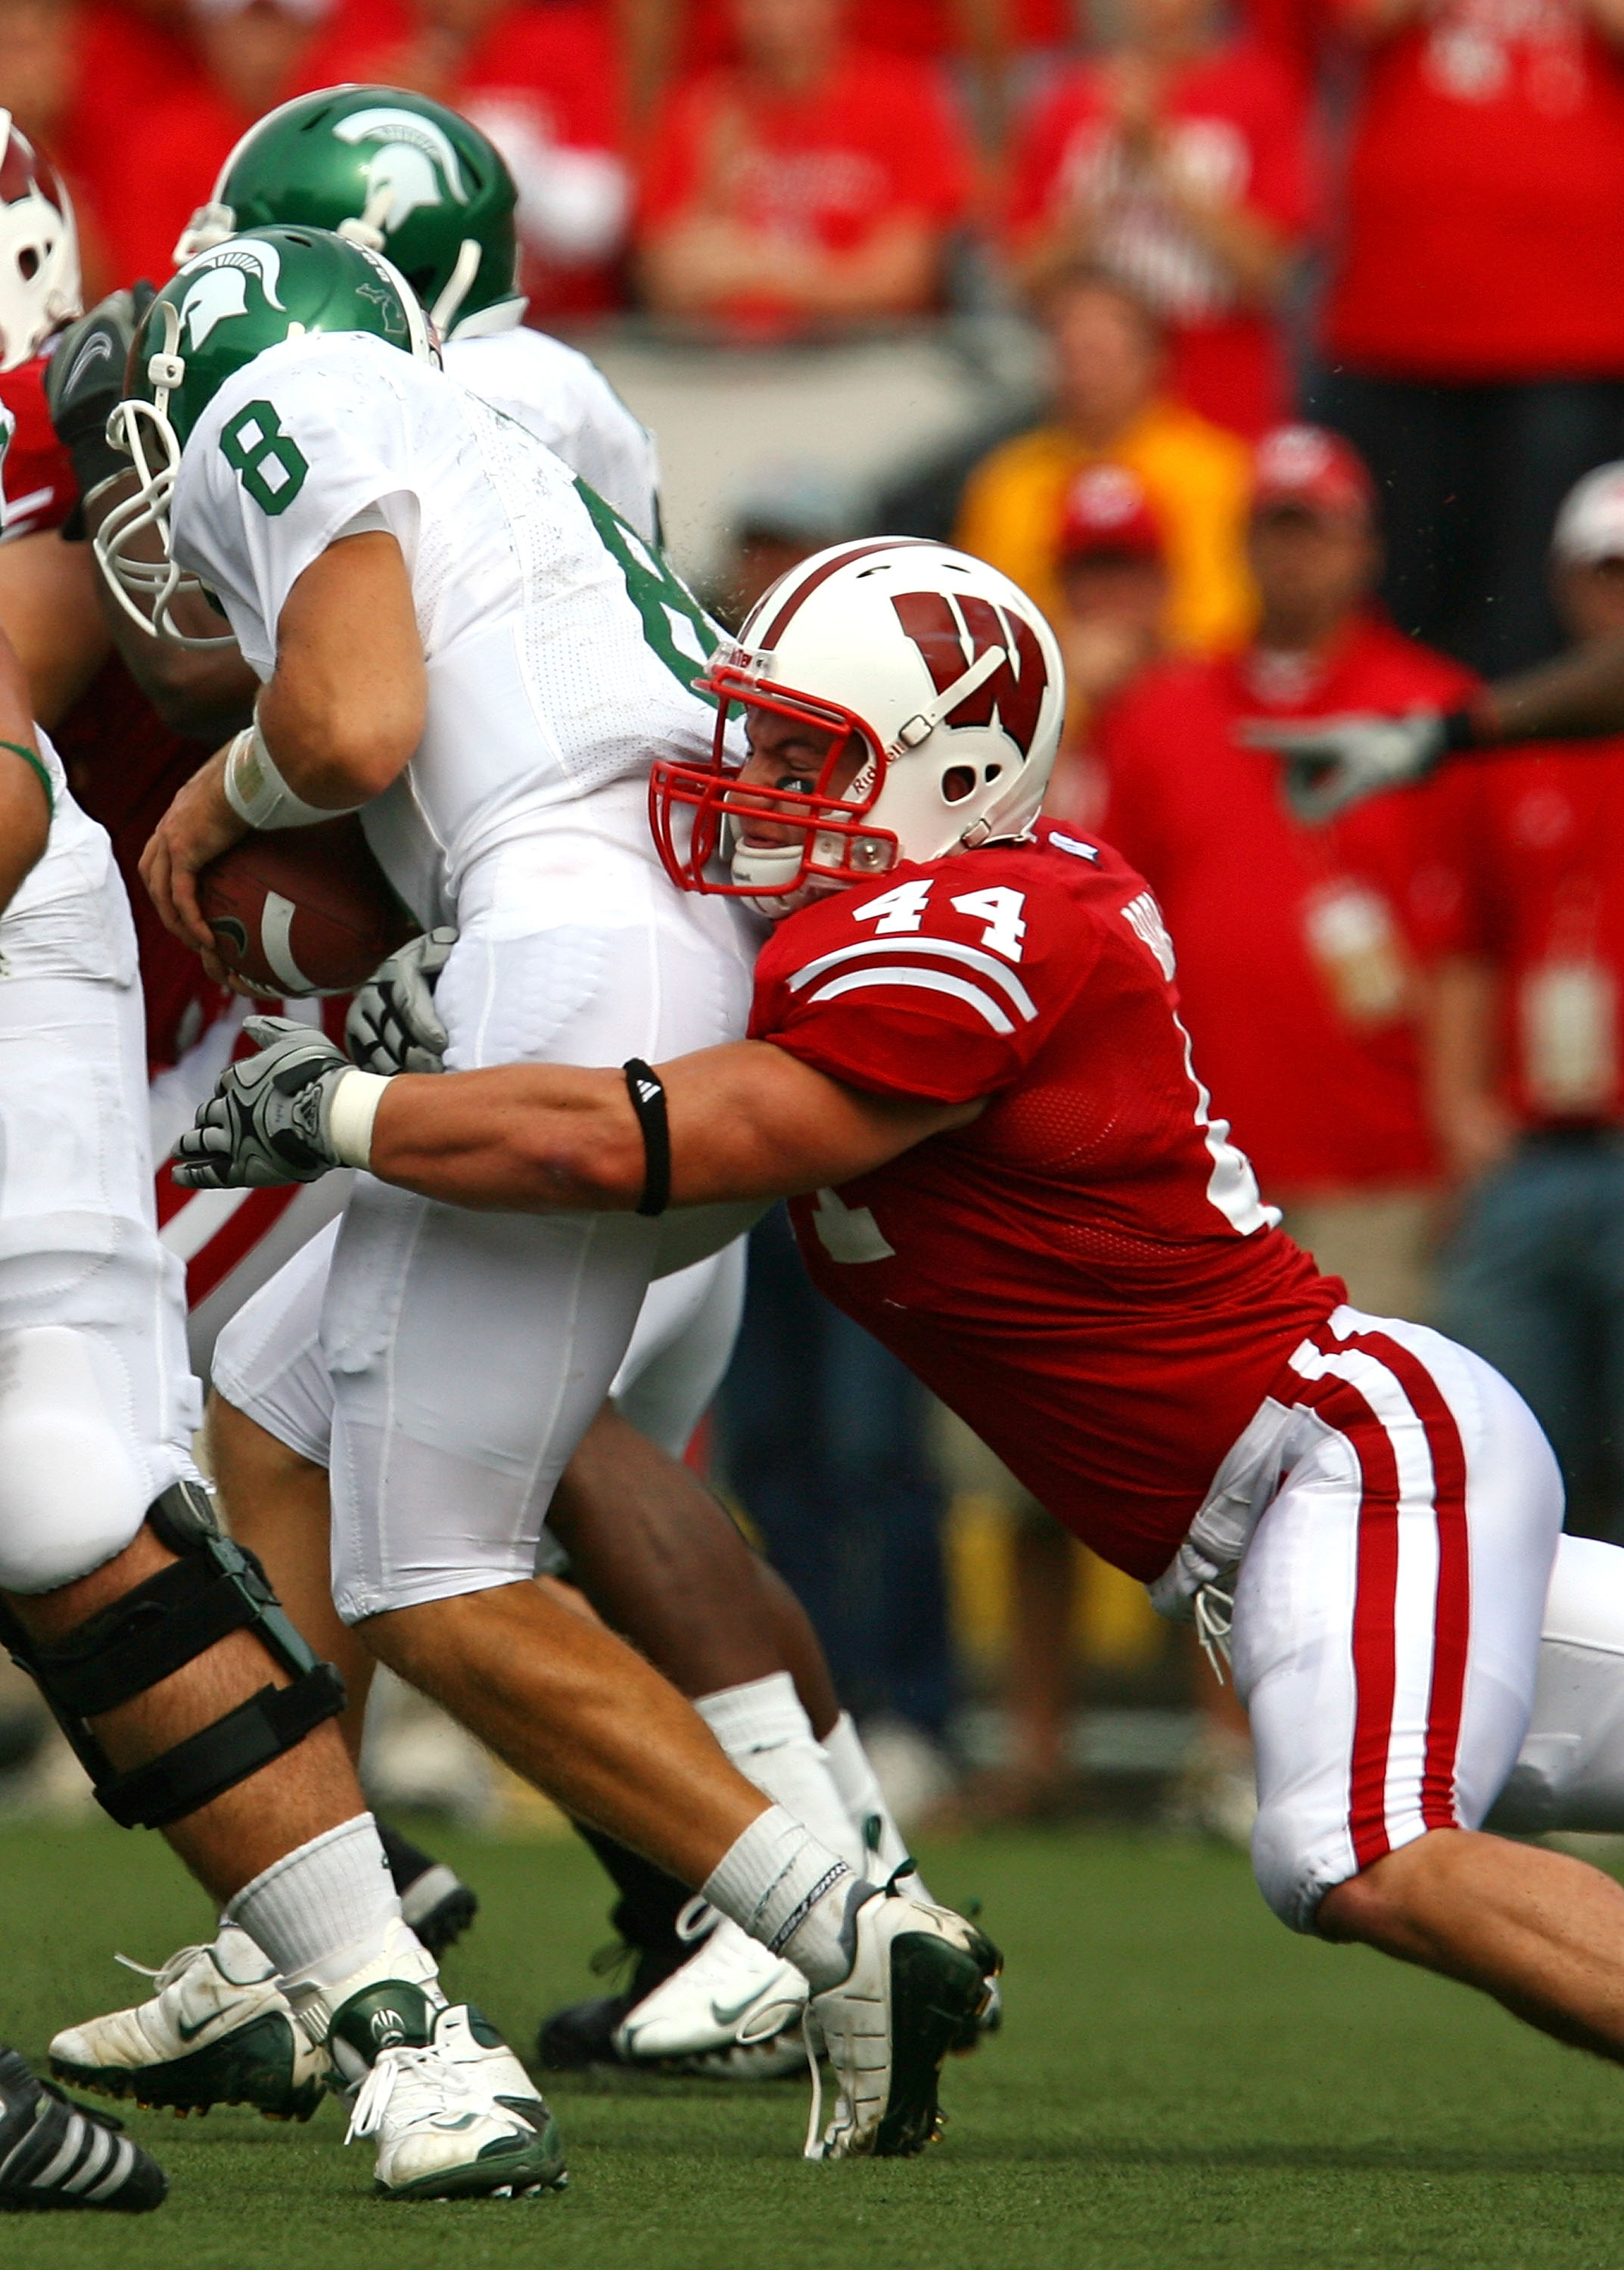 MADISON, WI - SEPTEMBER 26: Chris Borland #44 of the Wisconsin Badgers sacks Kirk Cousins #8 of the Michigan State Spartans on September 26, 2009 at Camp Randall Stadium in Madison, Wisconsin. Wisconsin defeated Michigan State 38-30. (Photo by Jonathan Da